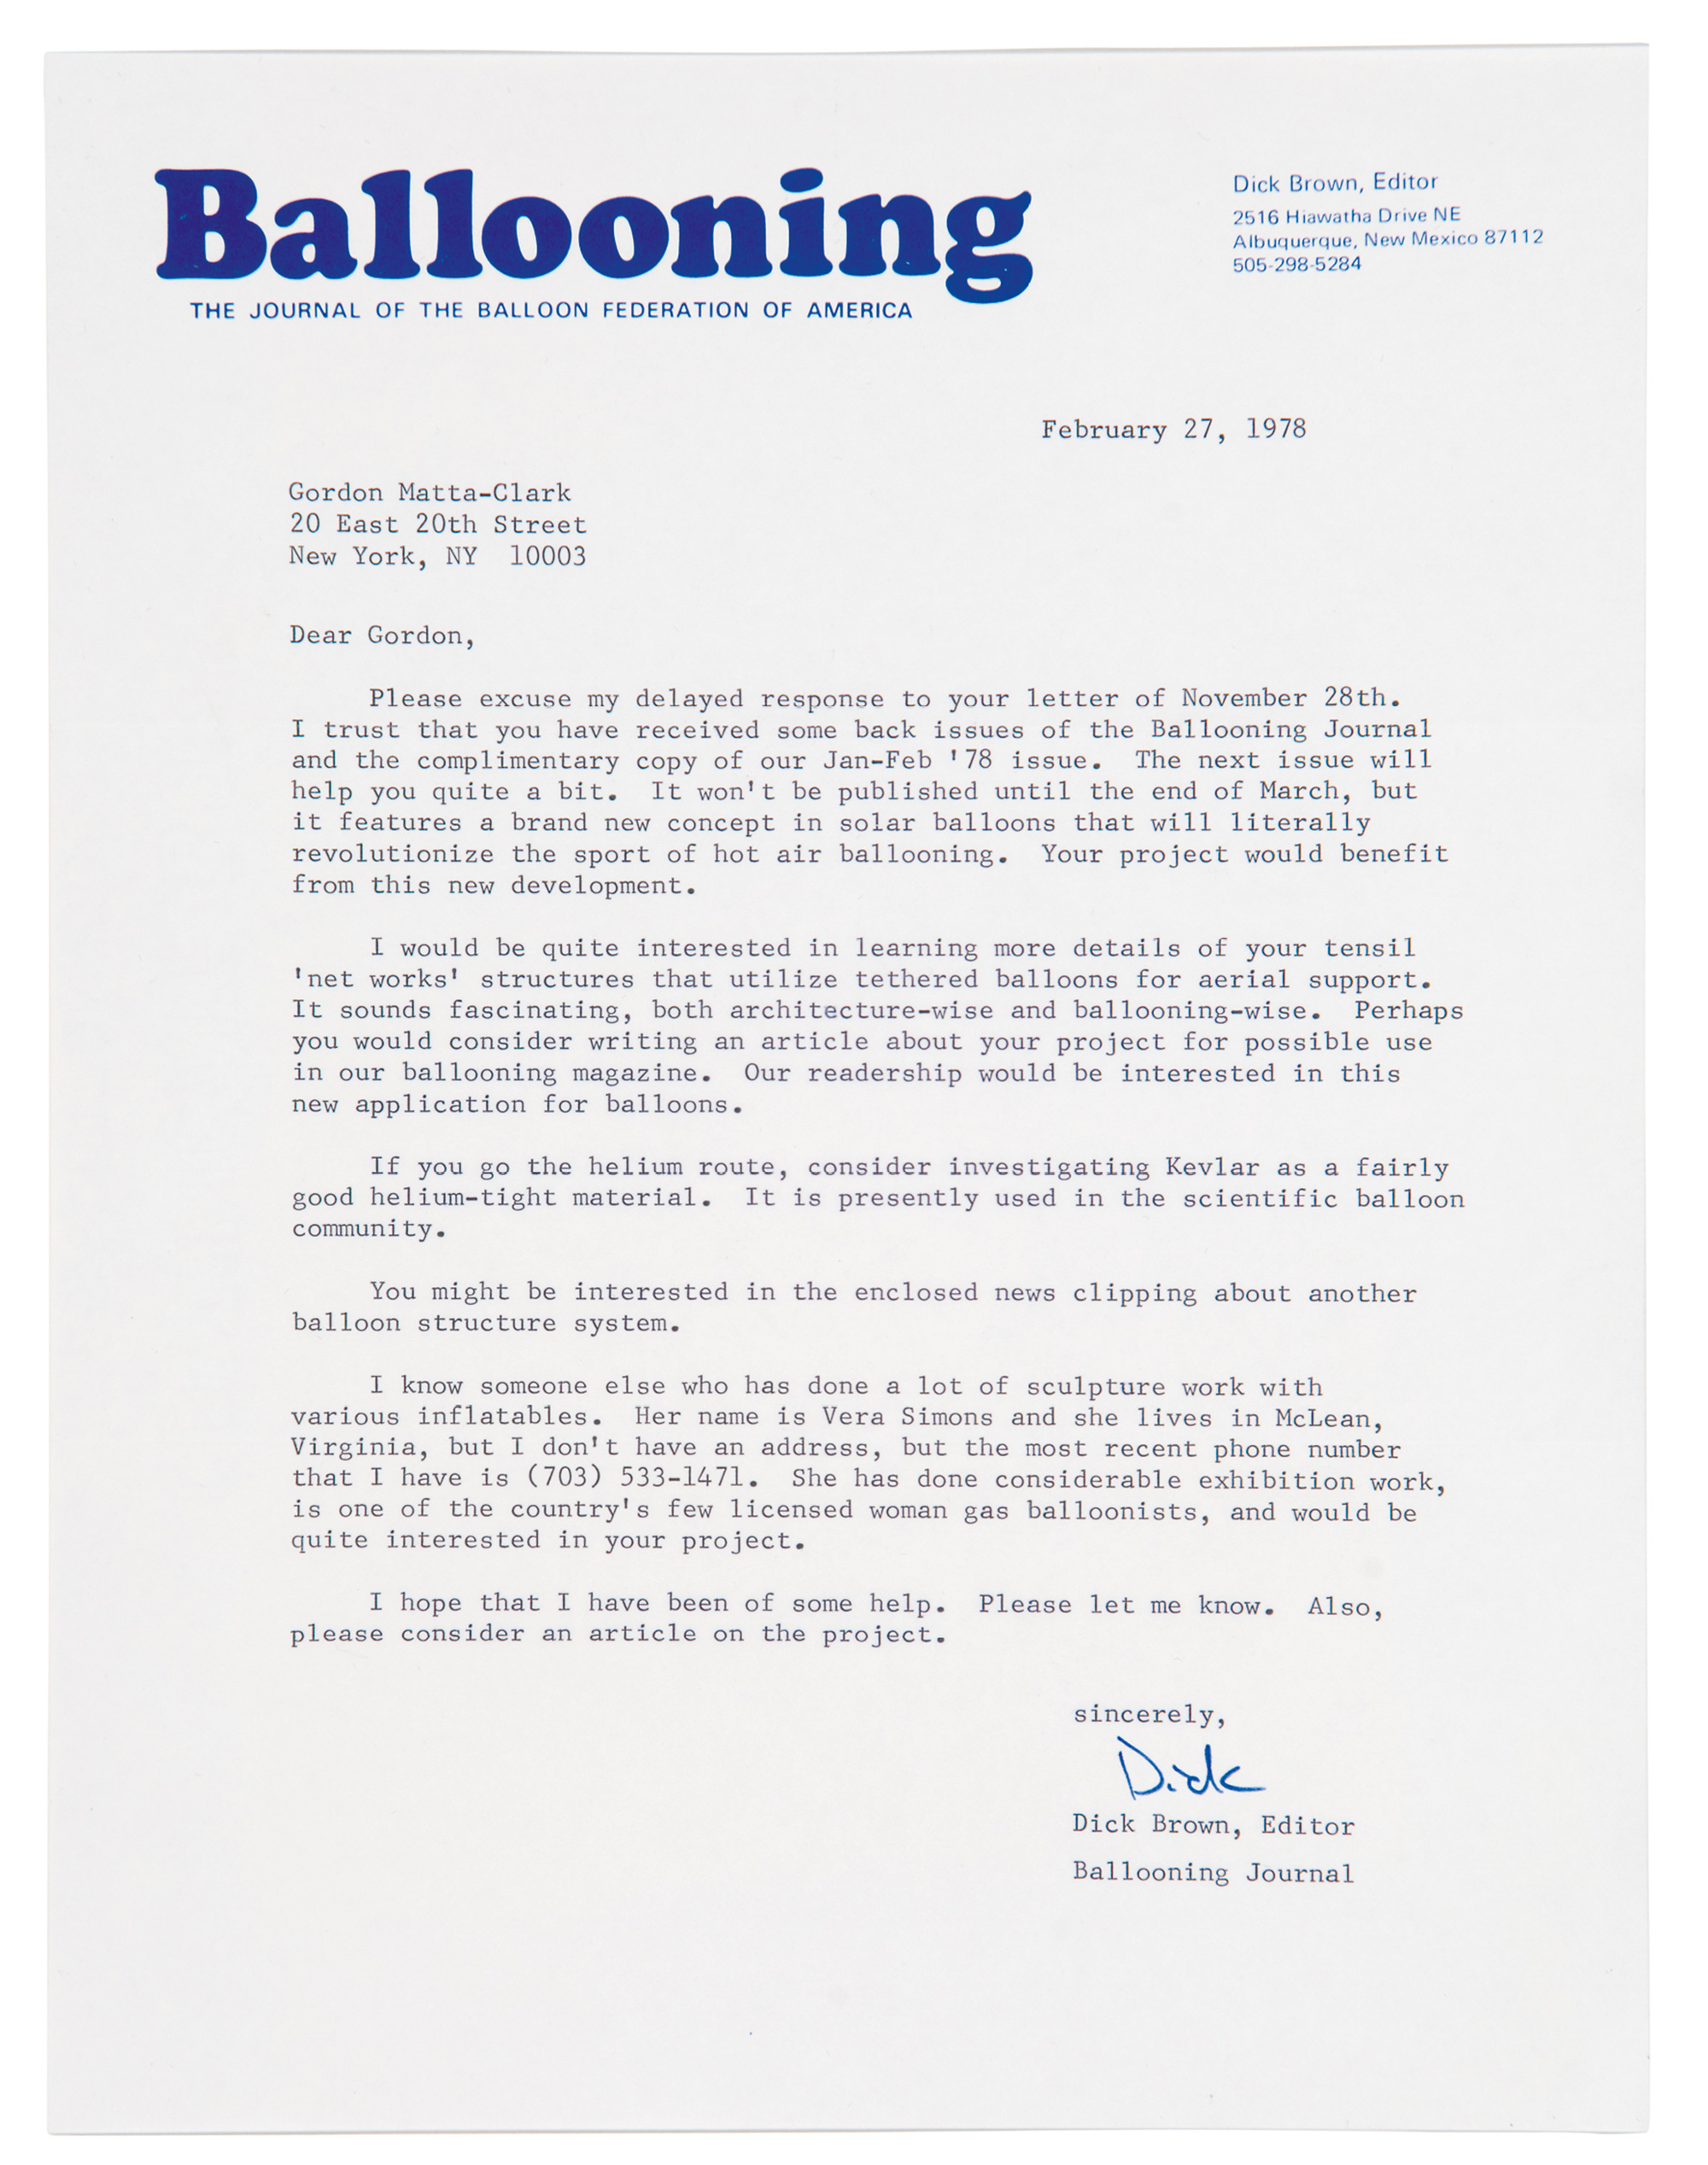 A nineteen seventy-seven letter from Dick Brown at Ballooning, The Journal of the Balloon Federation of America, to Gordon Matta-Clark. 